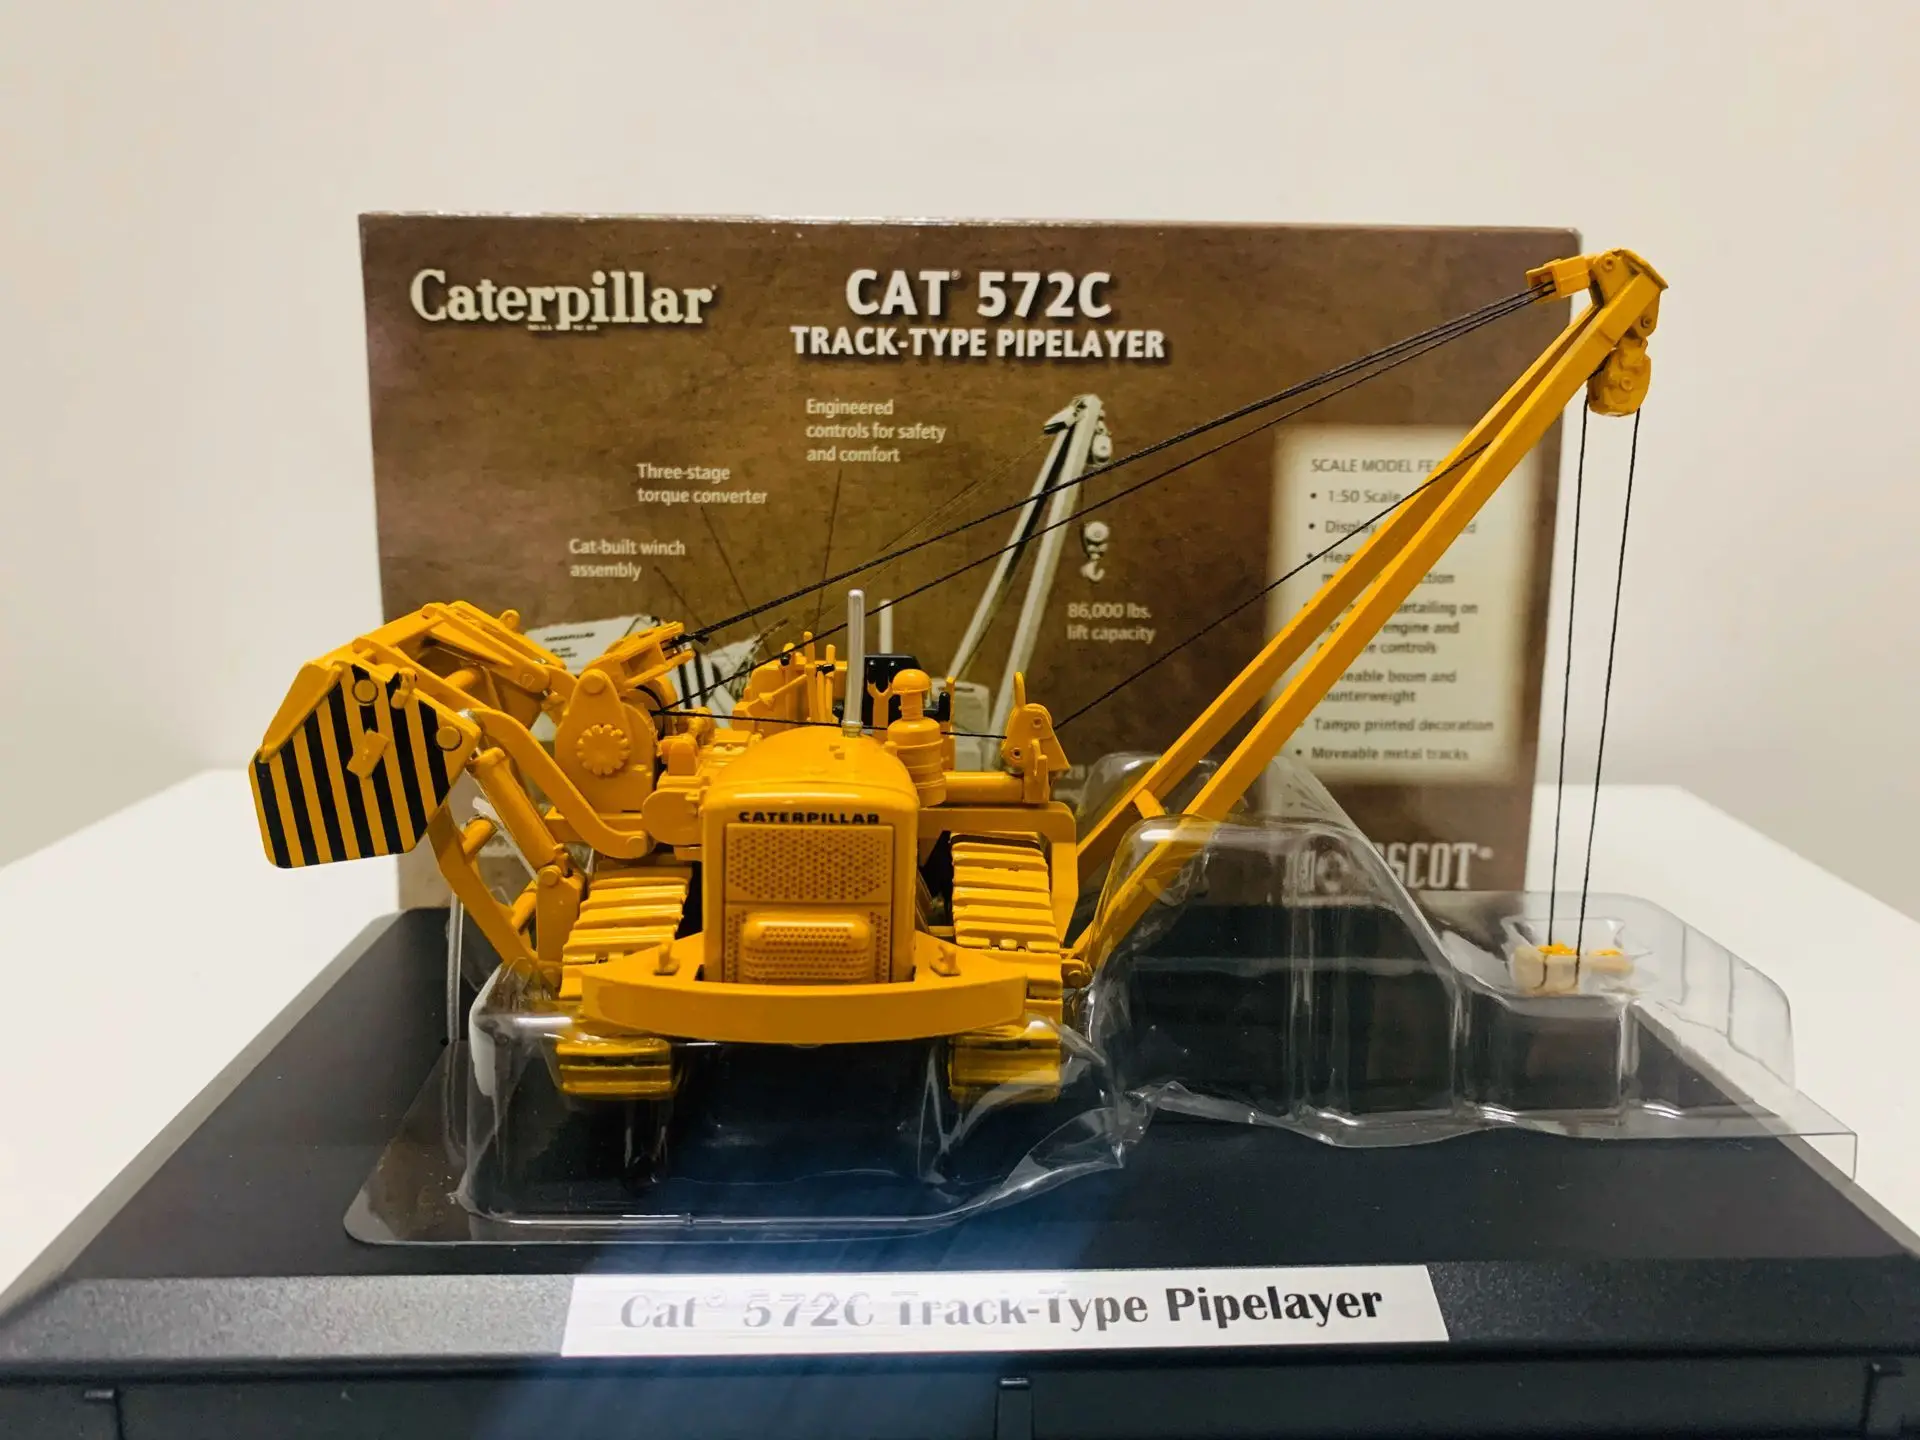 Cat 572C Track-Type Pipelayer Metal Tracks 1/50 Scale Die-Cast Model 55210 New in Box